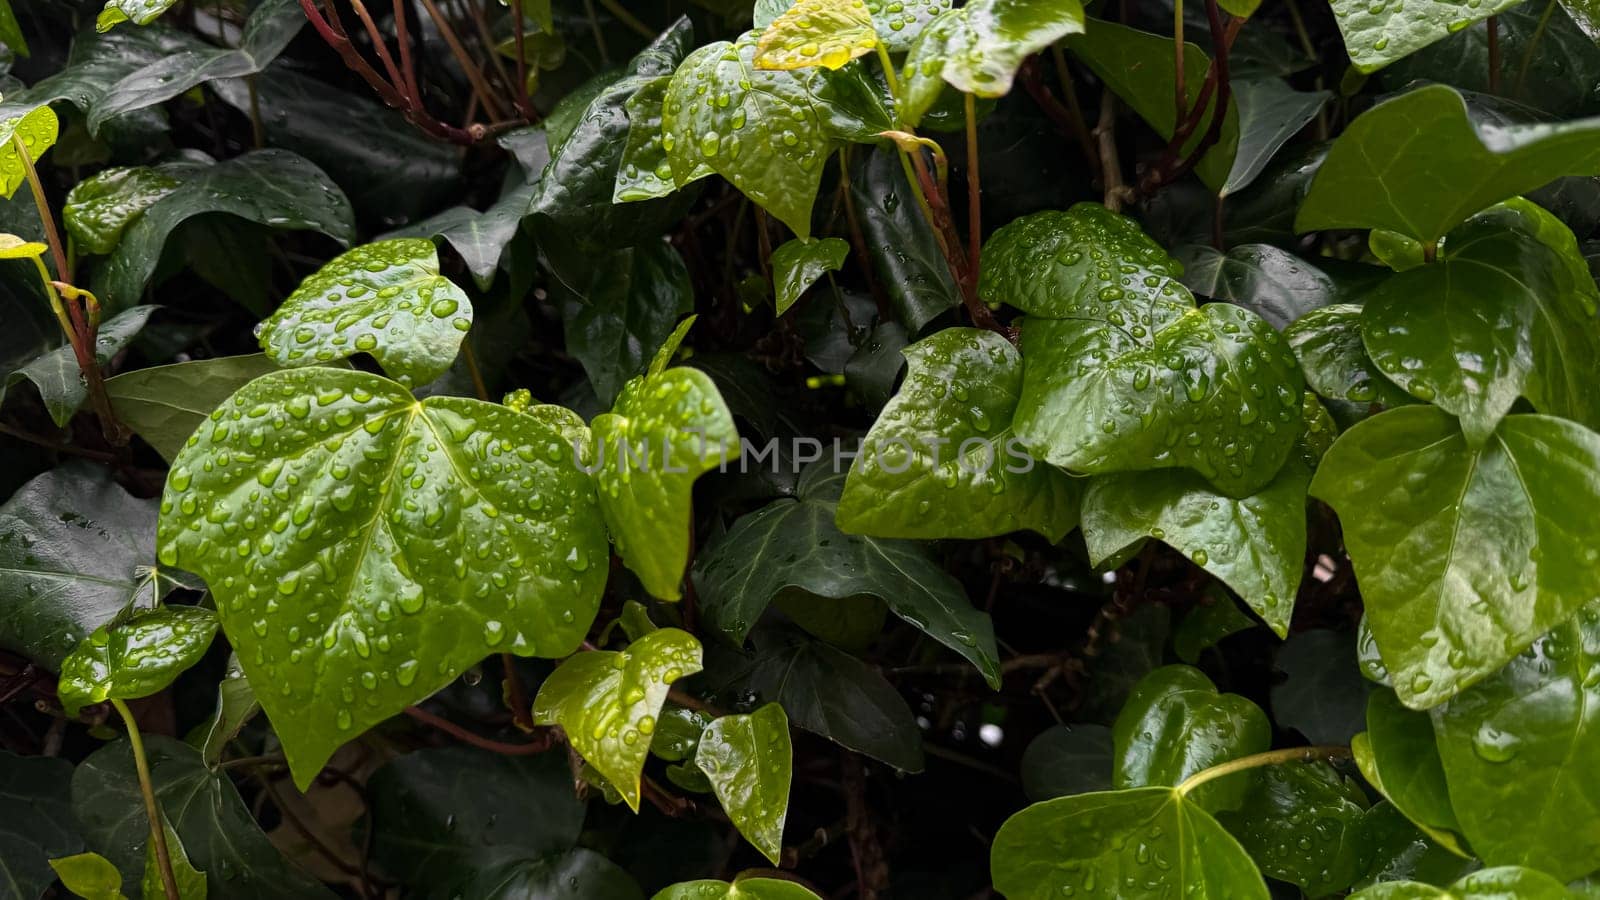 Wet green leaves with raindrops, close up on ivy plant. Nature background. Freshness concept for design and print. Macro shot with copy space. High quality photo